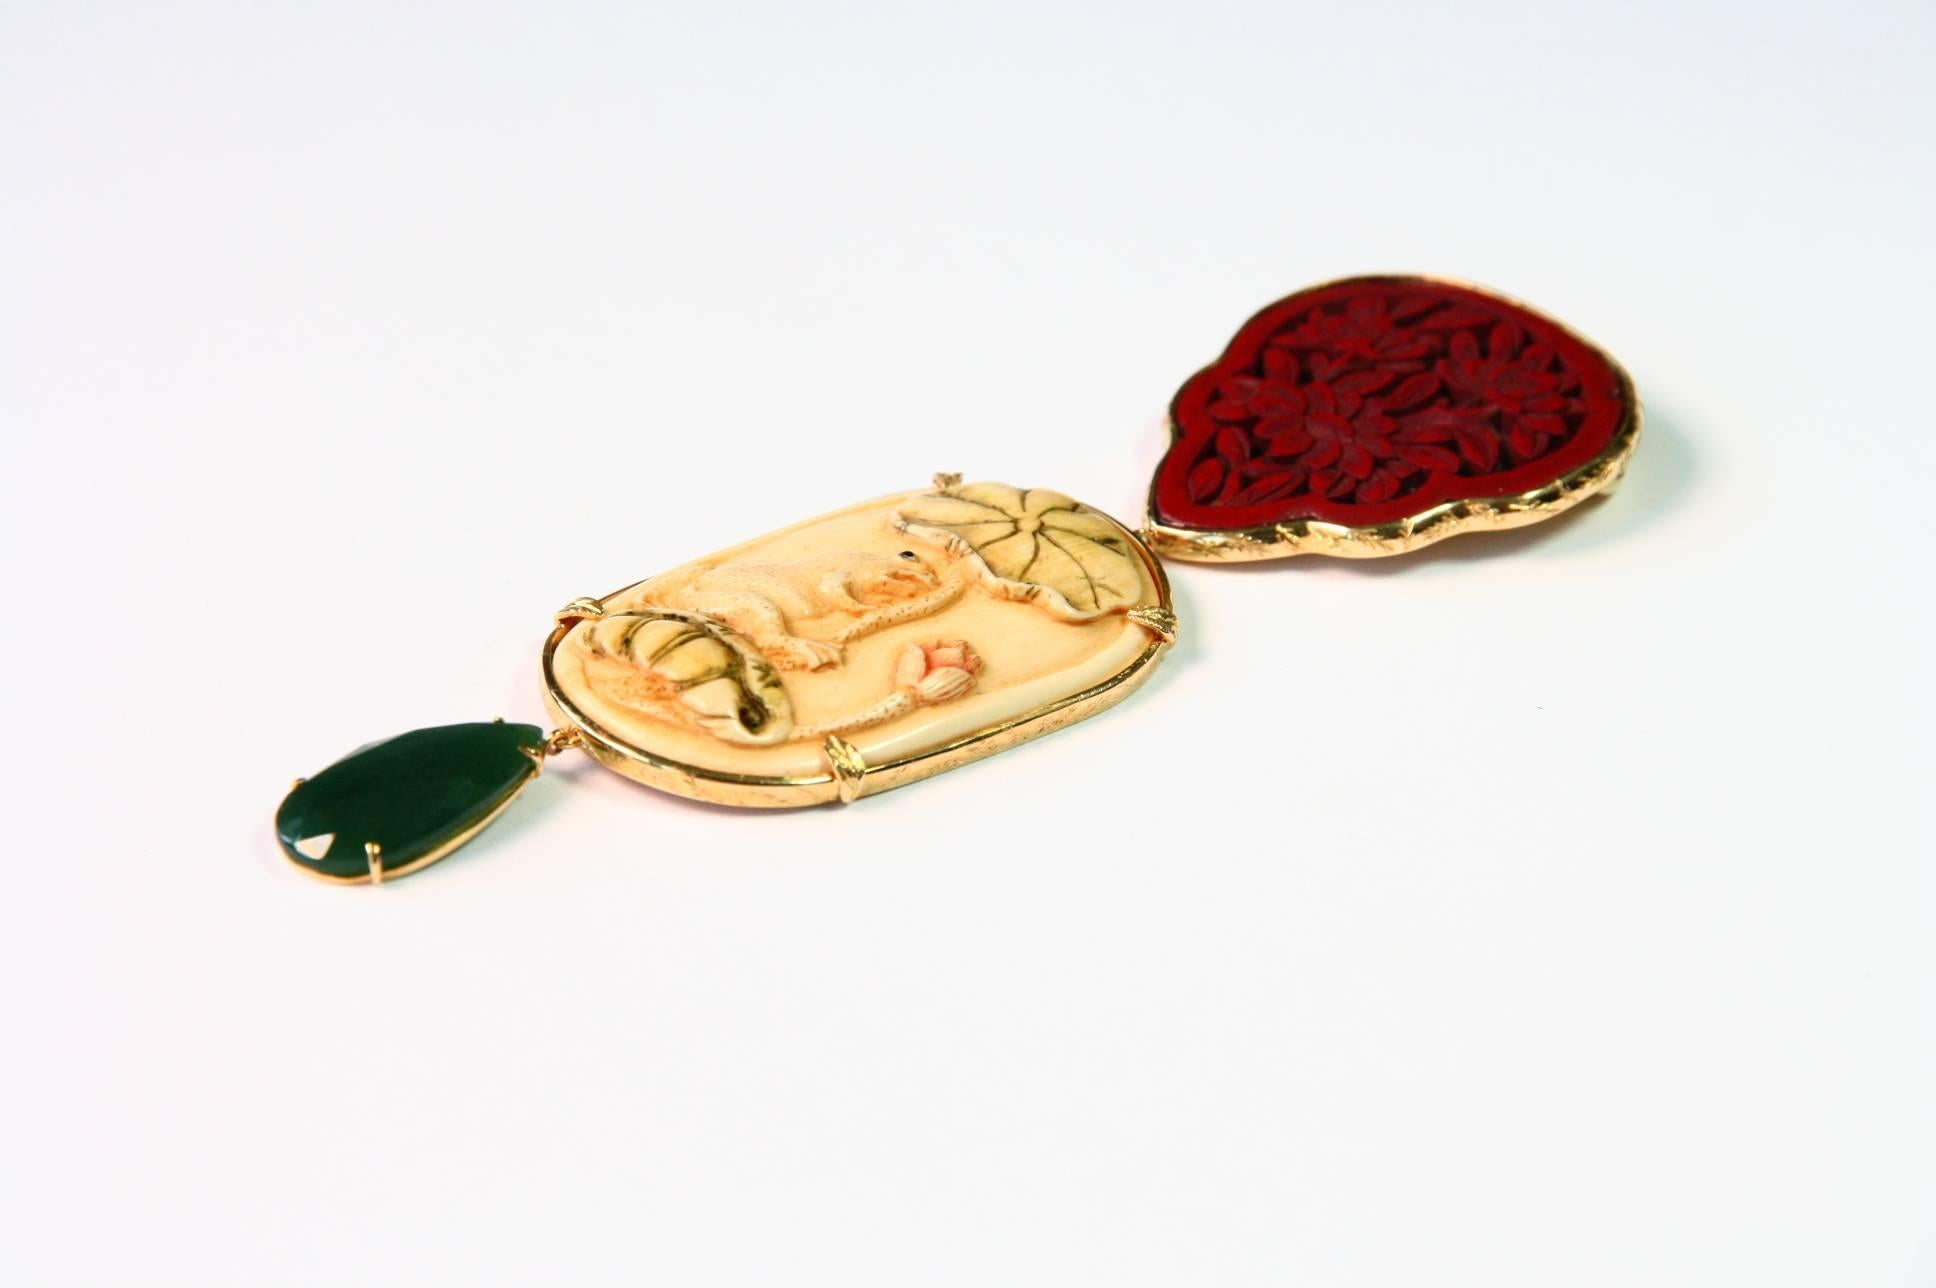 Pendant with very fine carved antiques japanies netsuke with from under lotus flower, faced emerald drop, 1920 cinese lacquer with  engrave flowers 18kt gold gr.20,90 with fine engrave decoration also in the back. Total length 11cm.
All Giulia